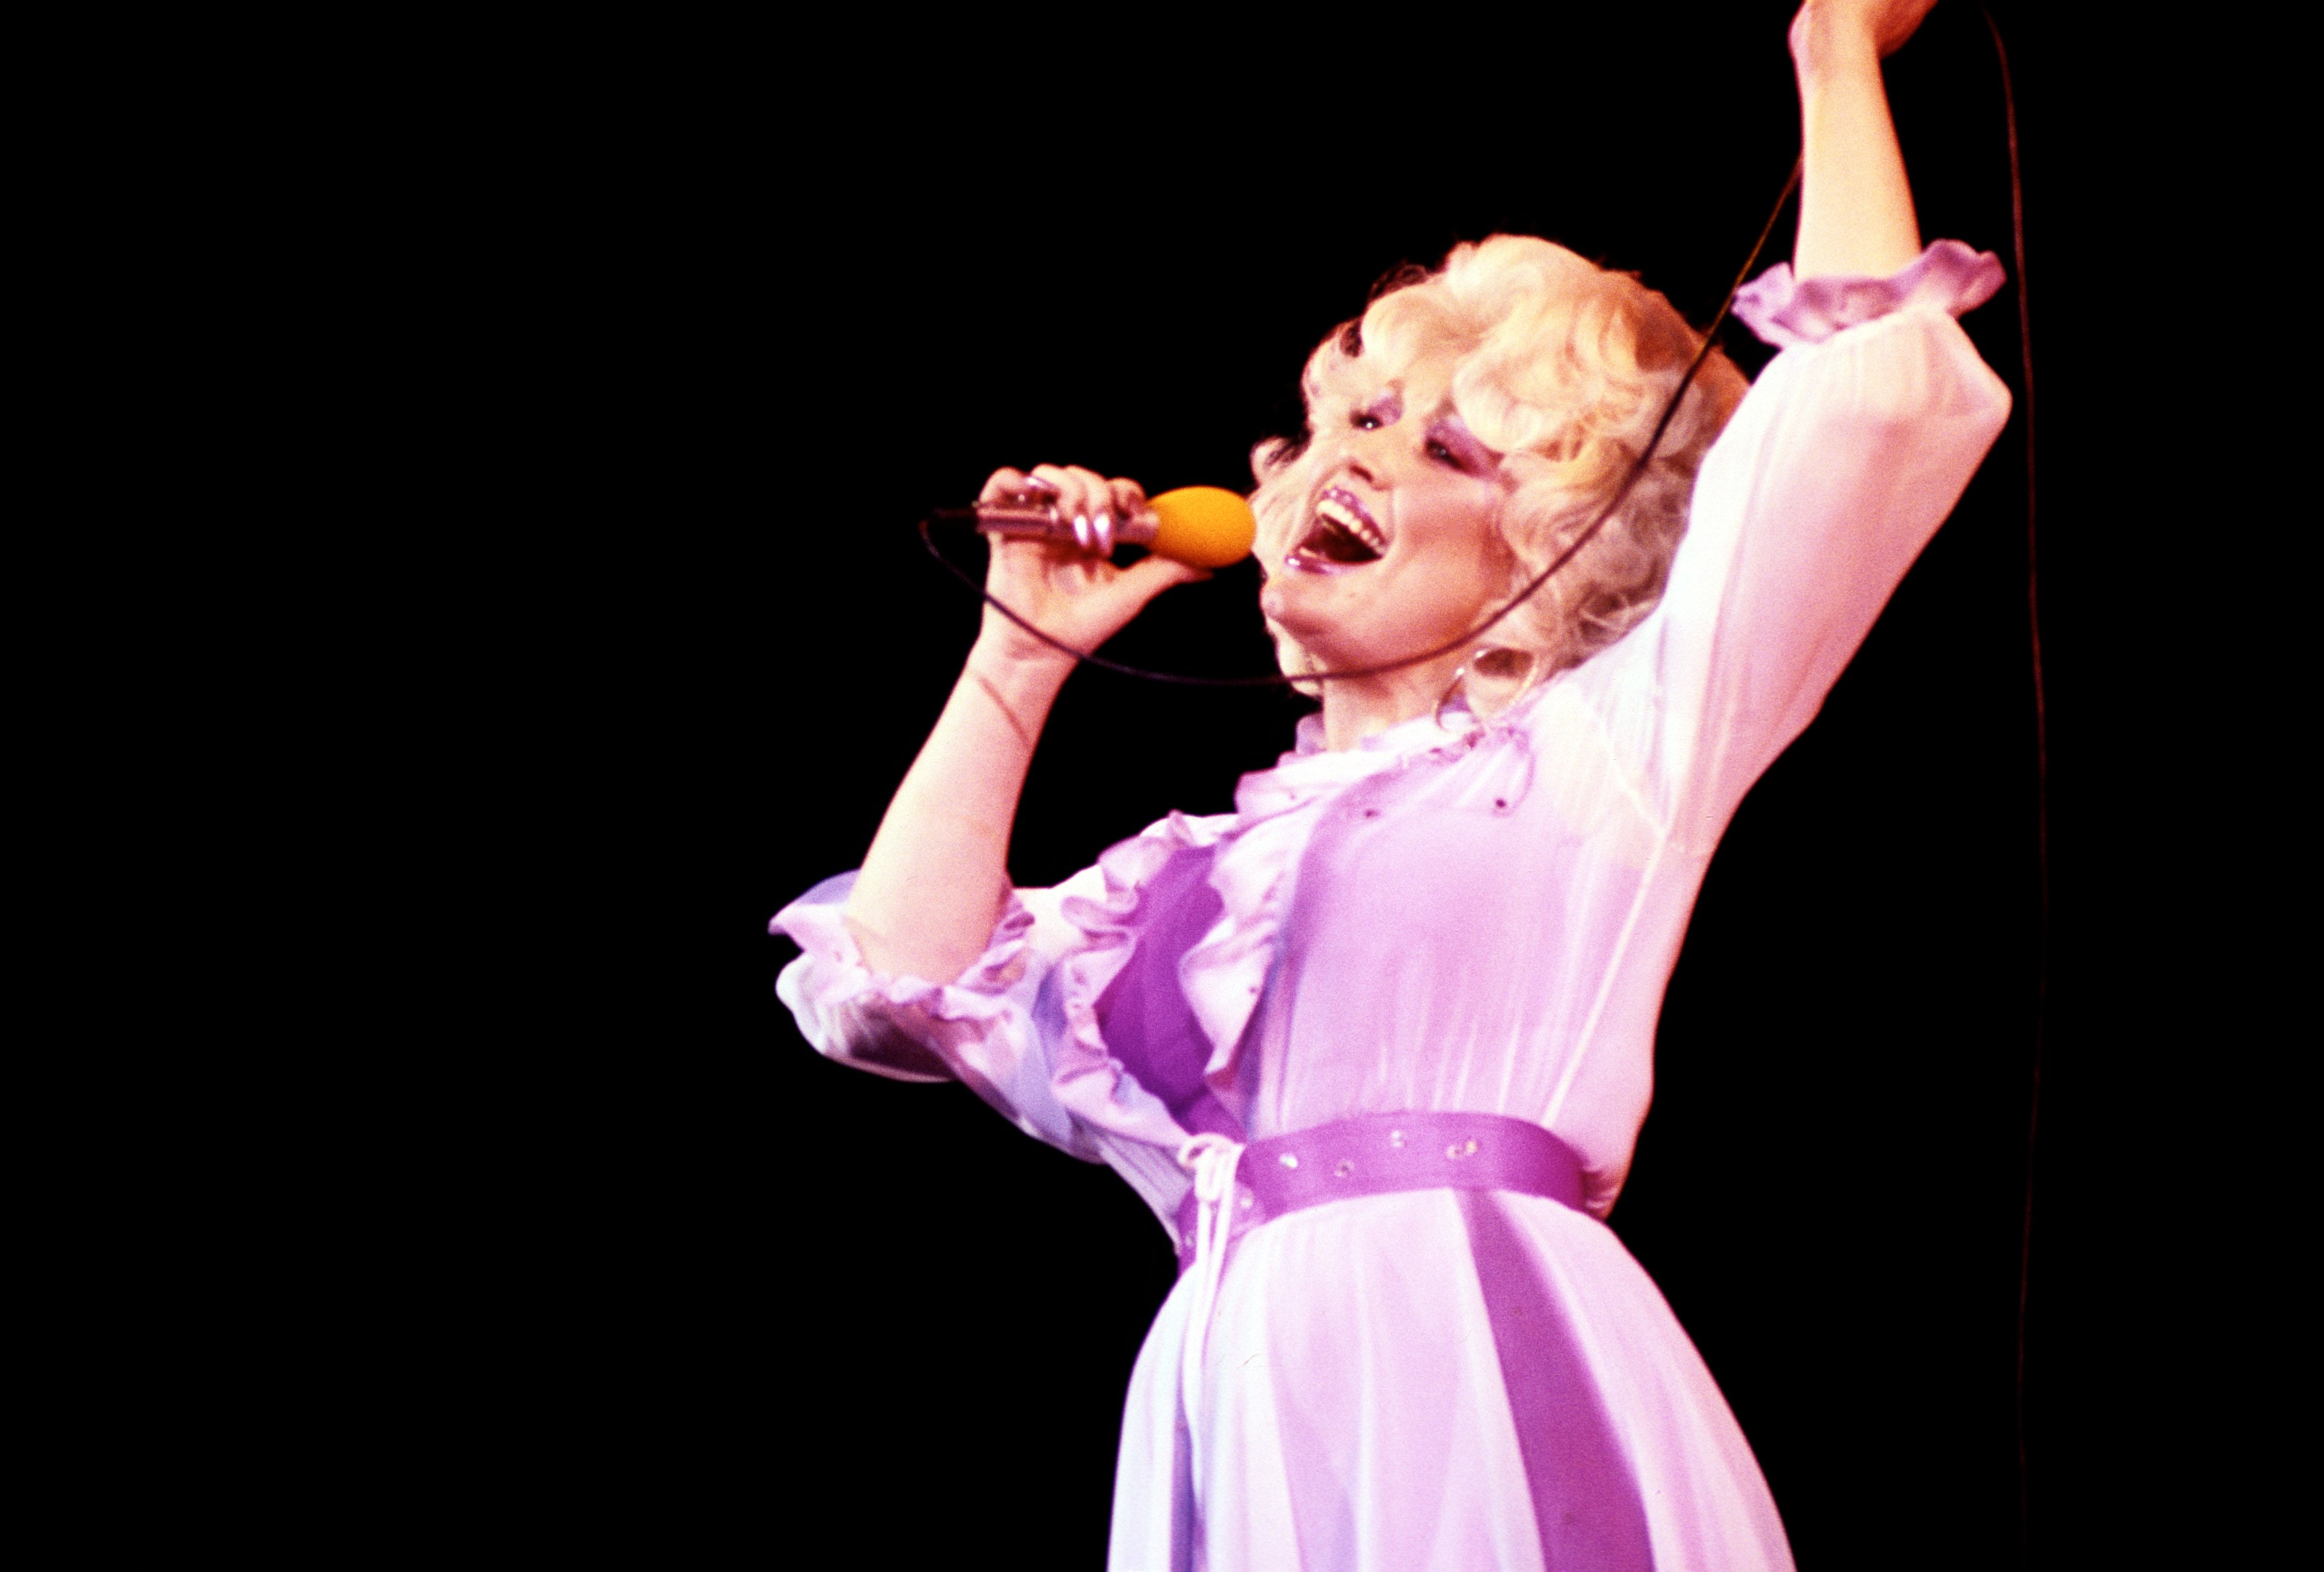 Dolly Parton singing on stage in a lavender dress.